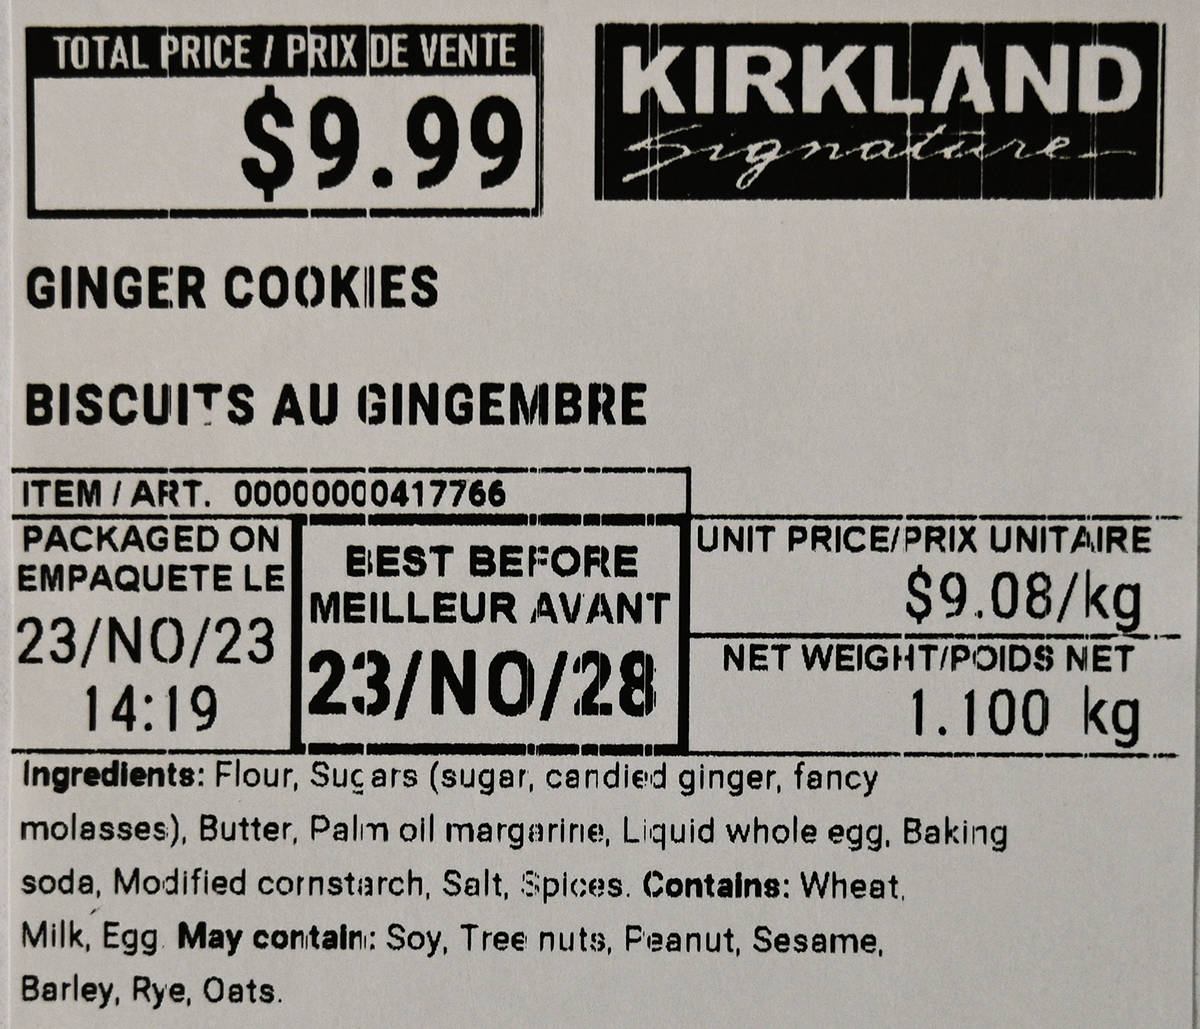 Closeup image of the front label of the cookies showing cost, ingredients and best before date.